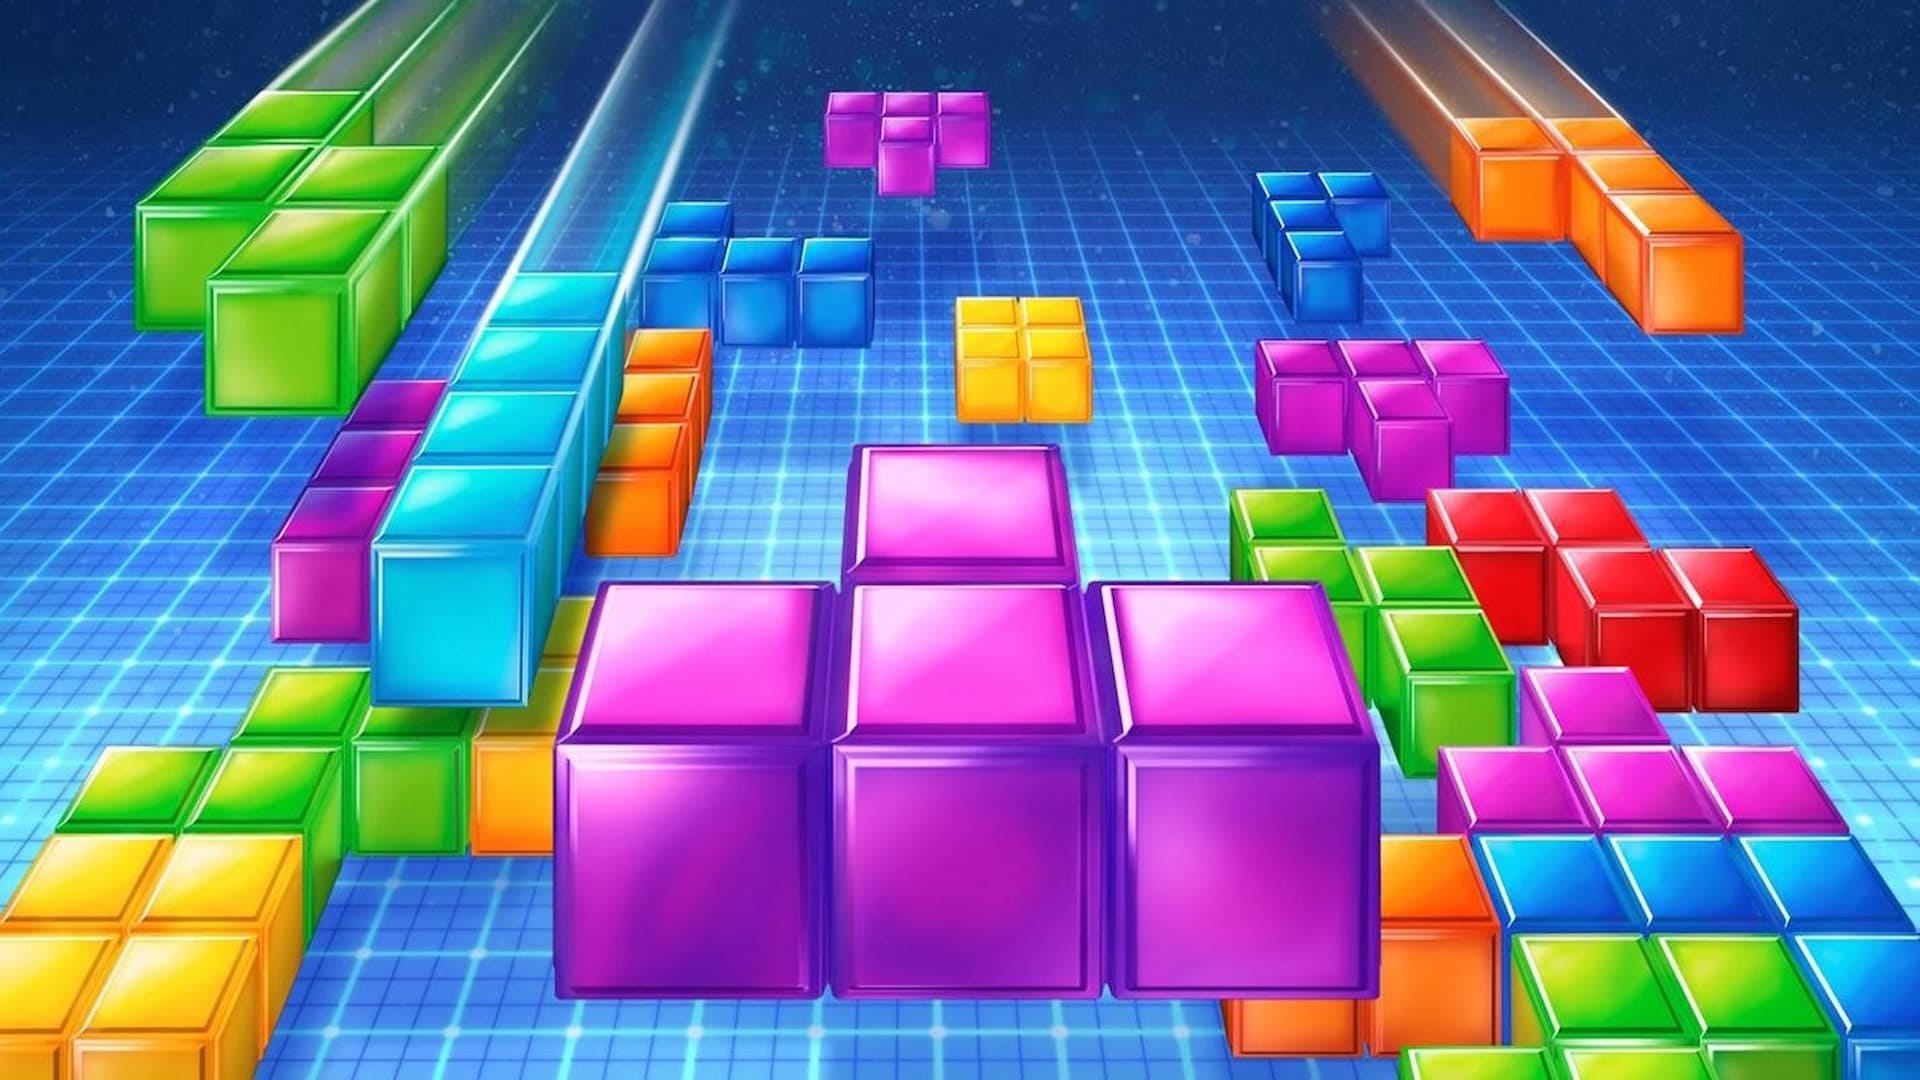 The Tetris Movie Being Rated R Is Ridiculous